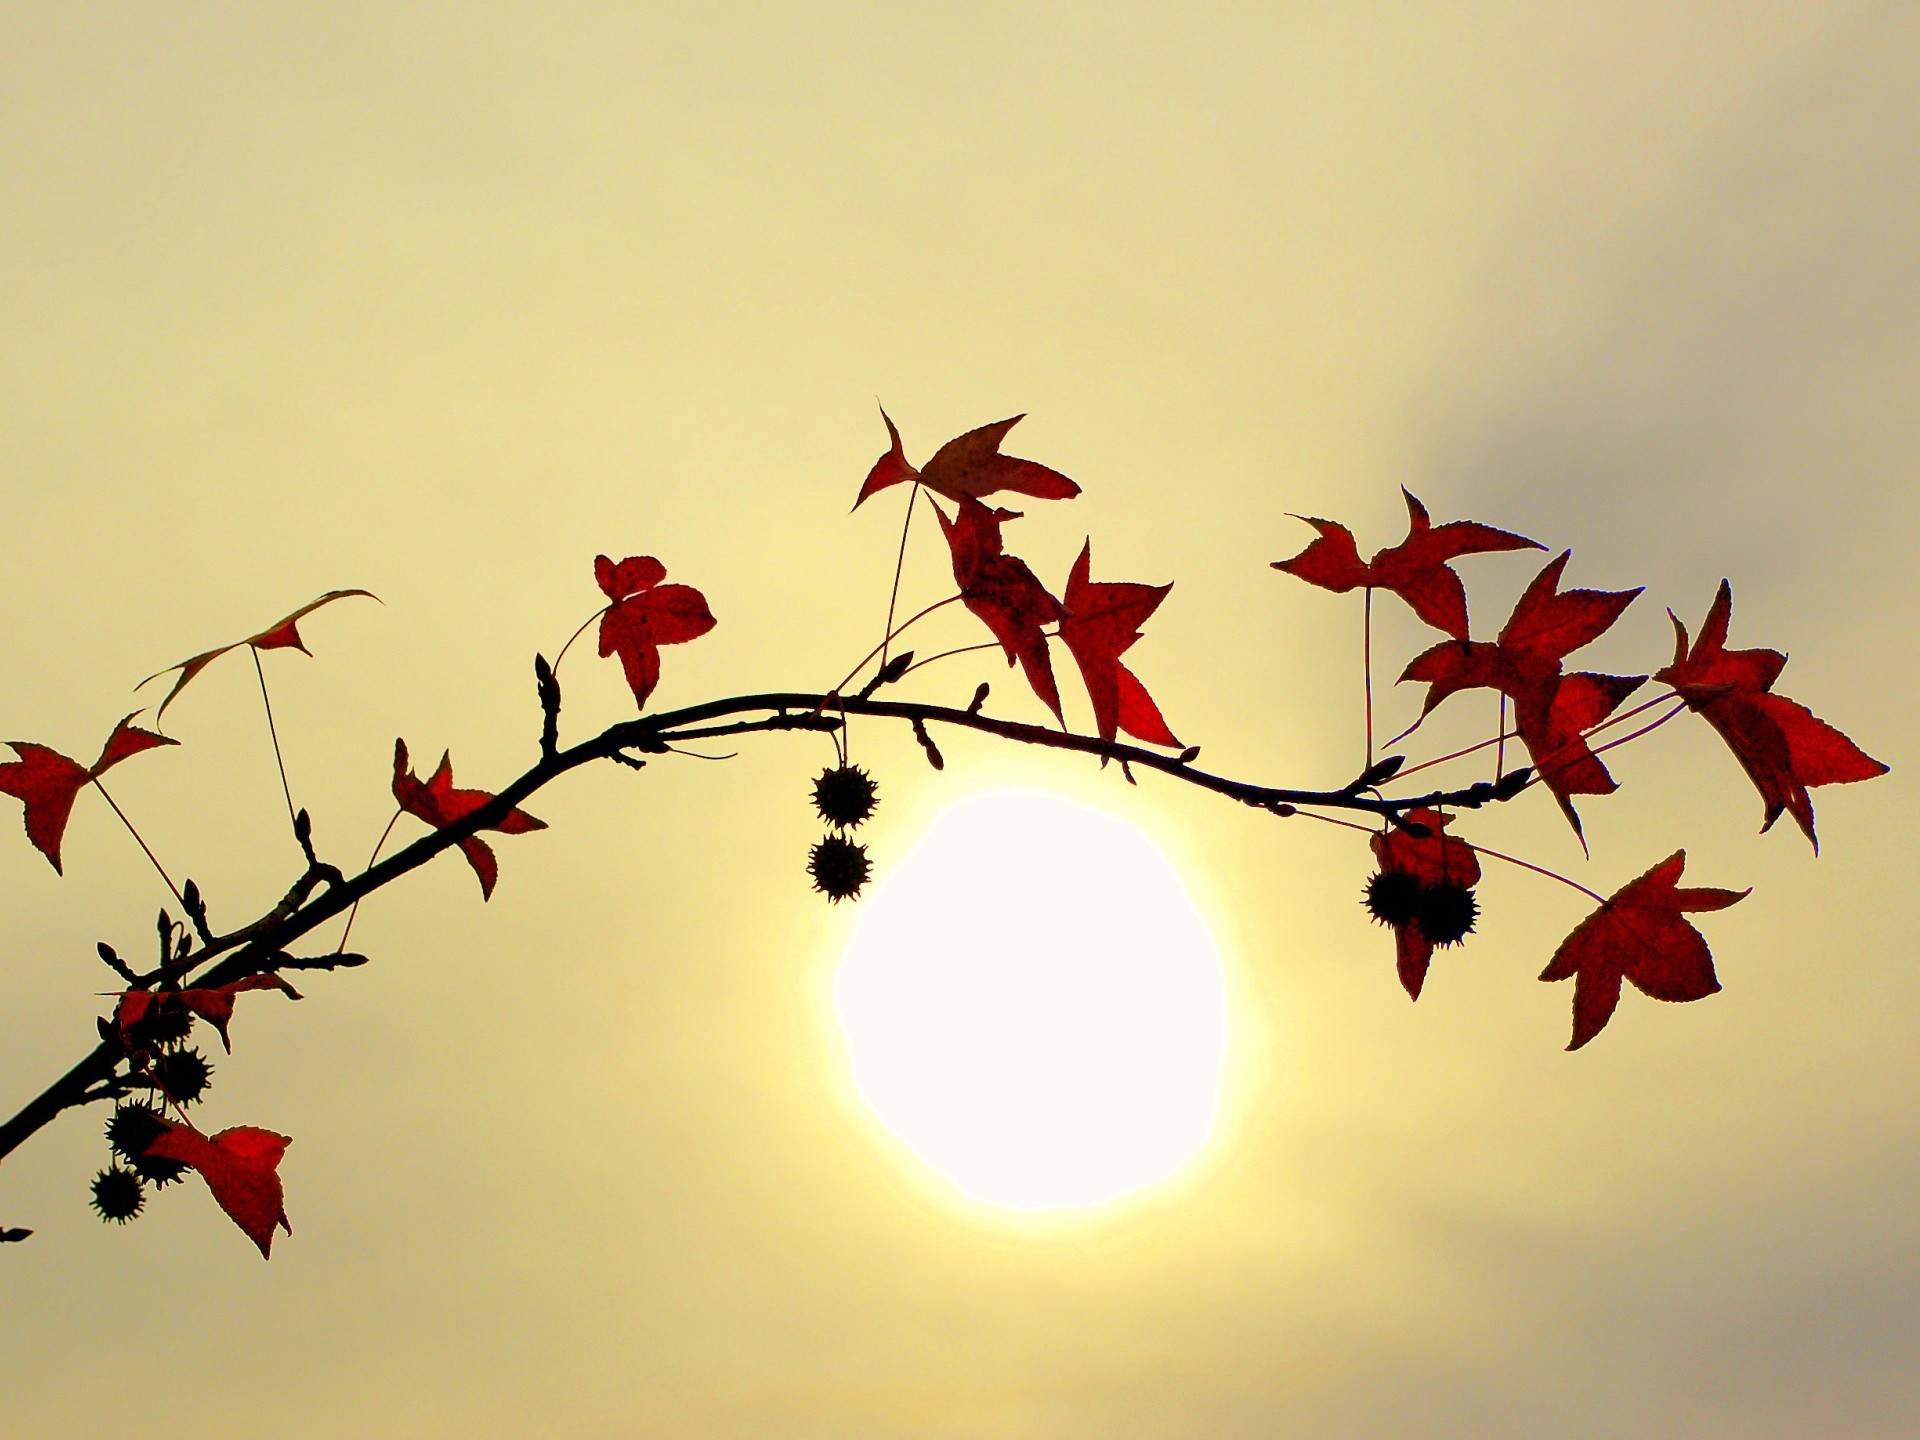 branch, With, Red, Leaves, Against, A, Bright, Sun Wallpaper